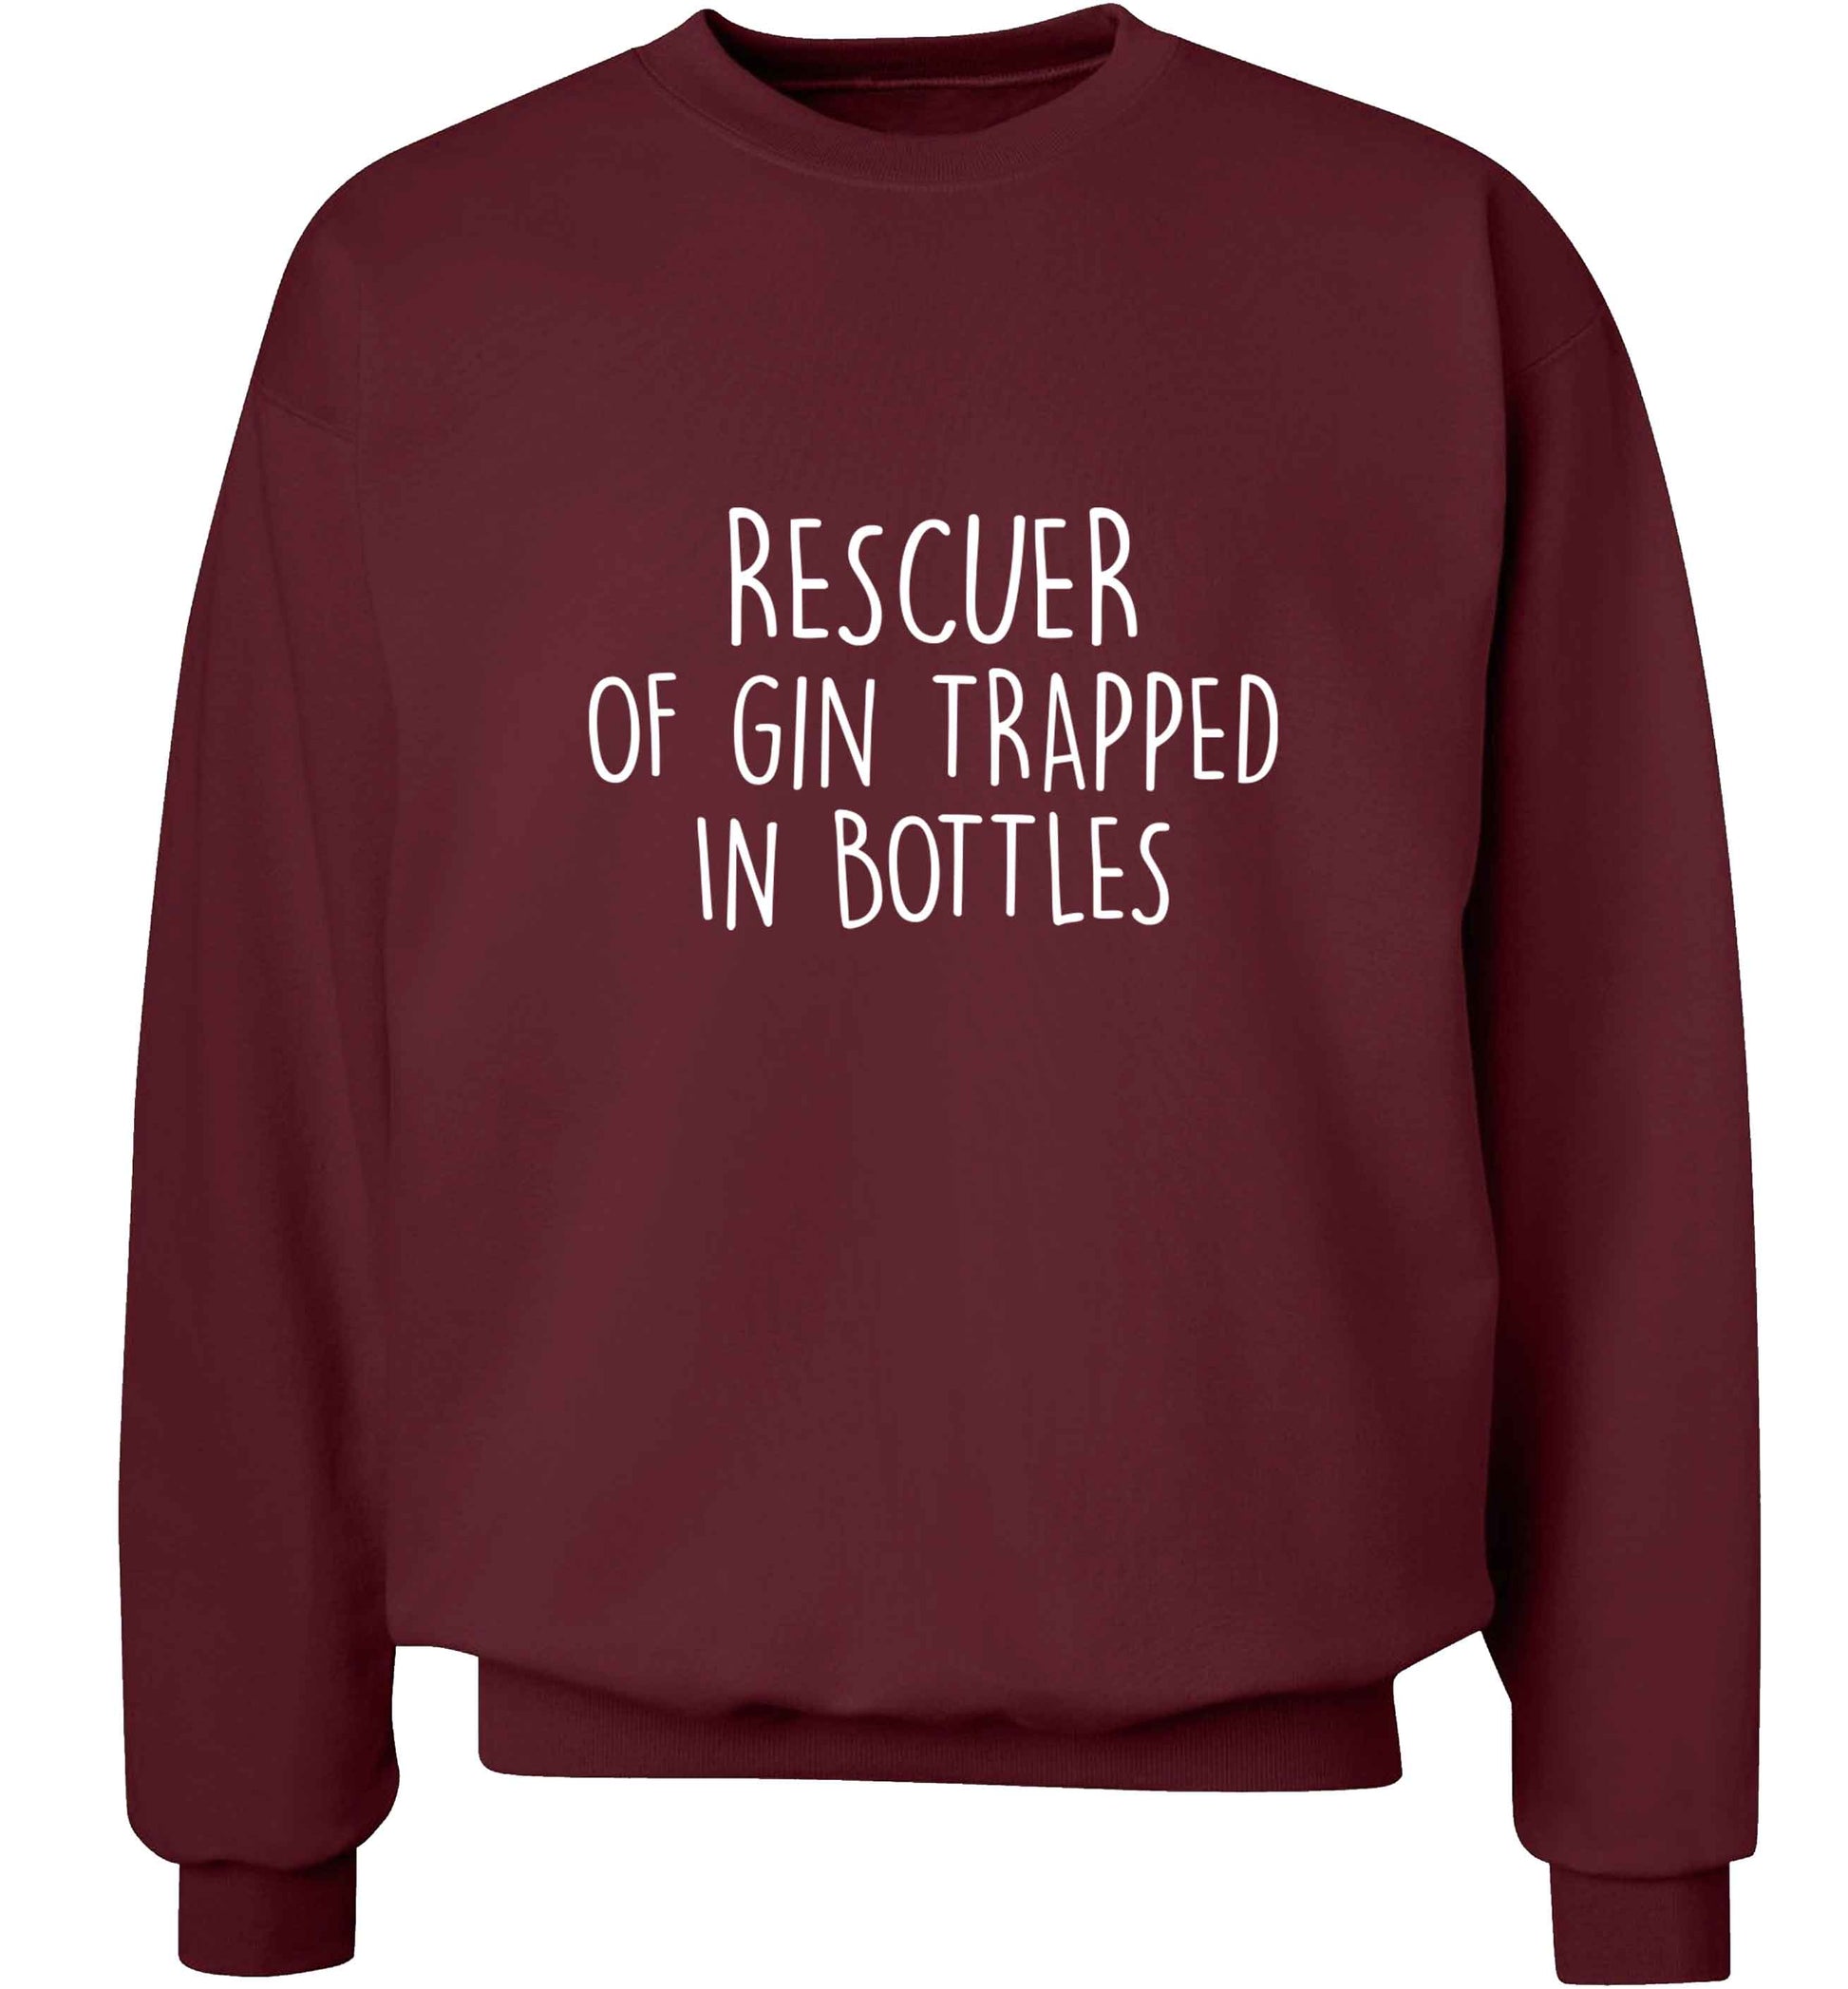 Rescuer of gin trapped in bottles adult's unisex maroon sweater 2XL